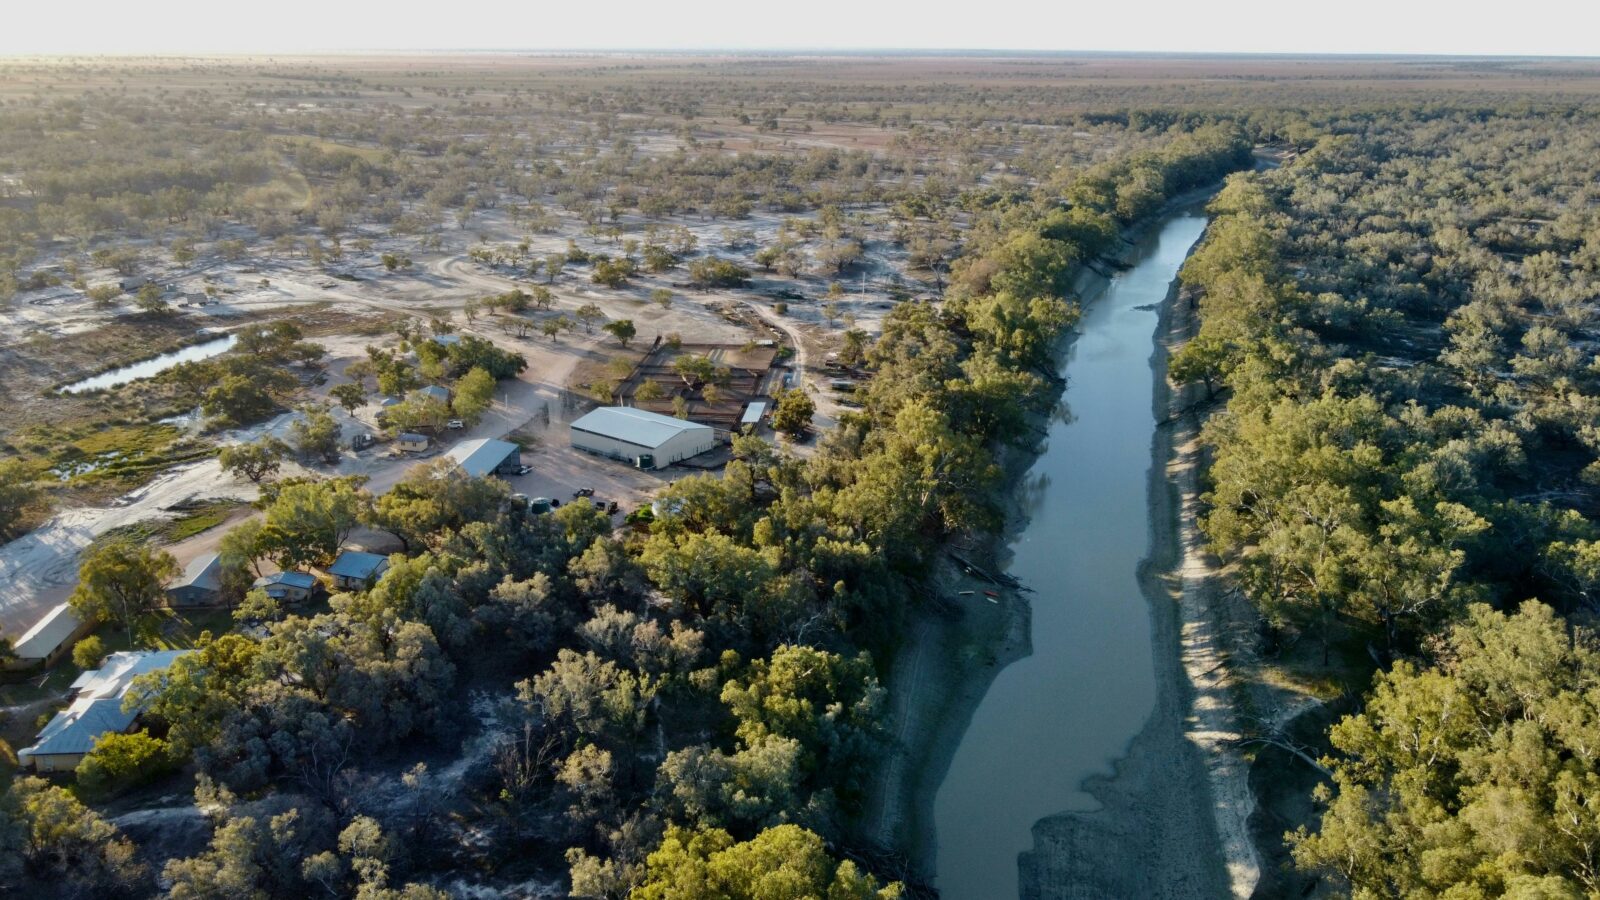 Darling River outback NSW campsites at Trilby Station